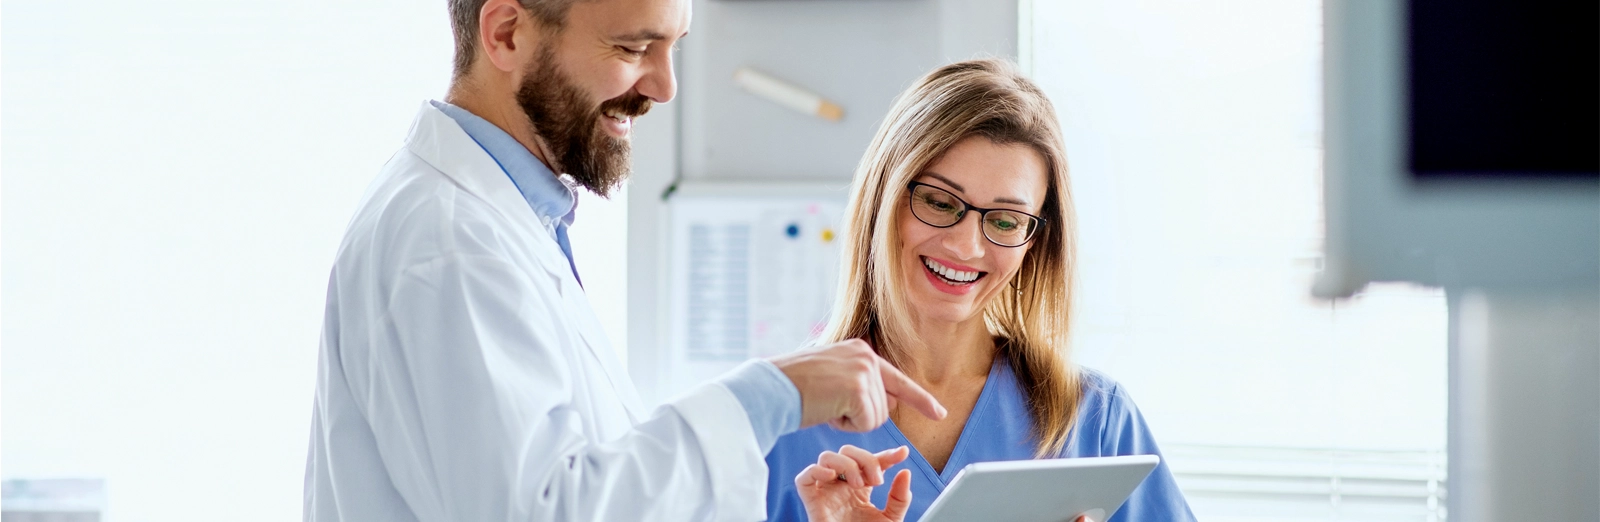 dentist-and-hygienist-looking-at-tablet-1600x522.webp